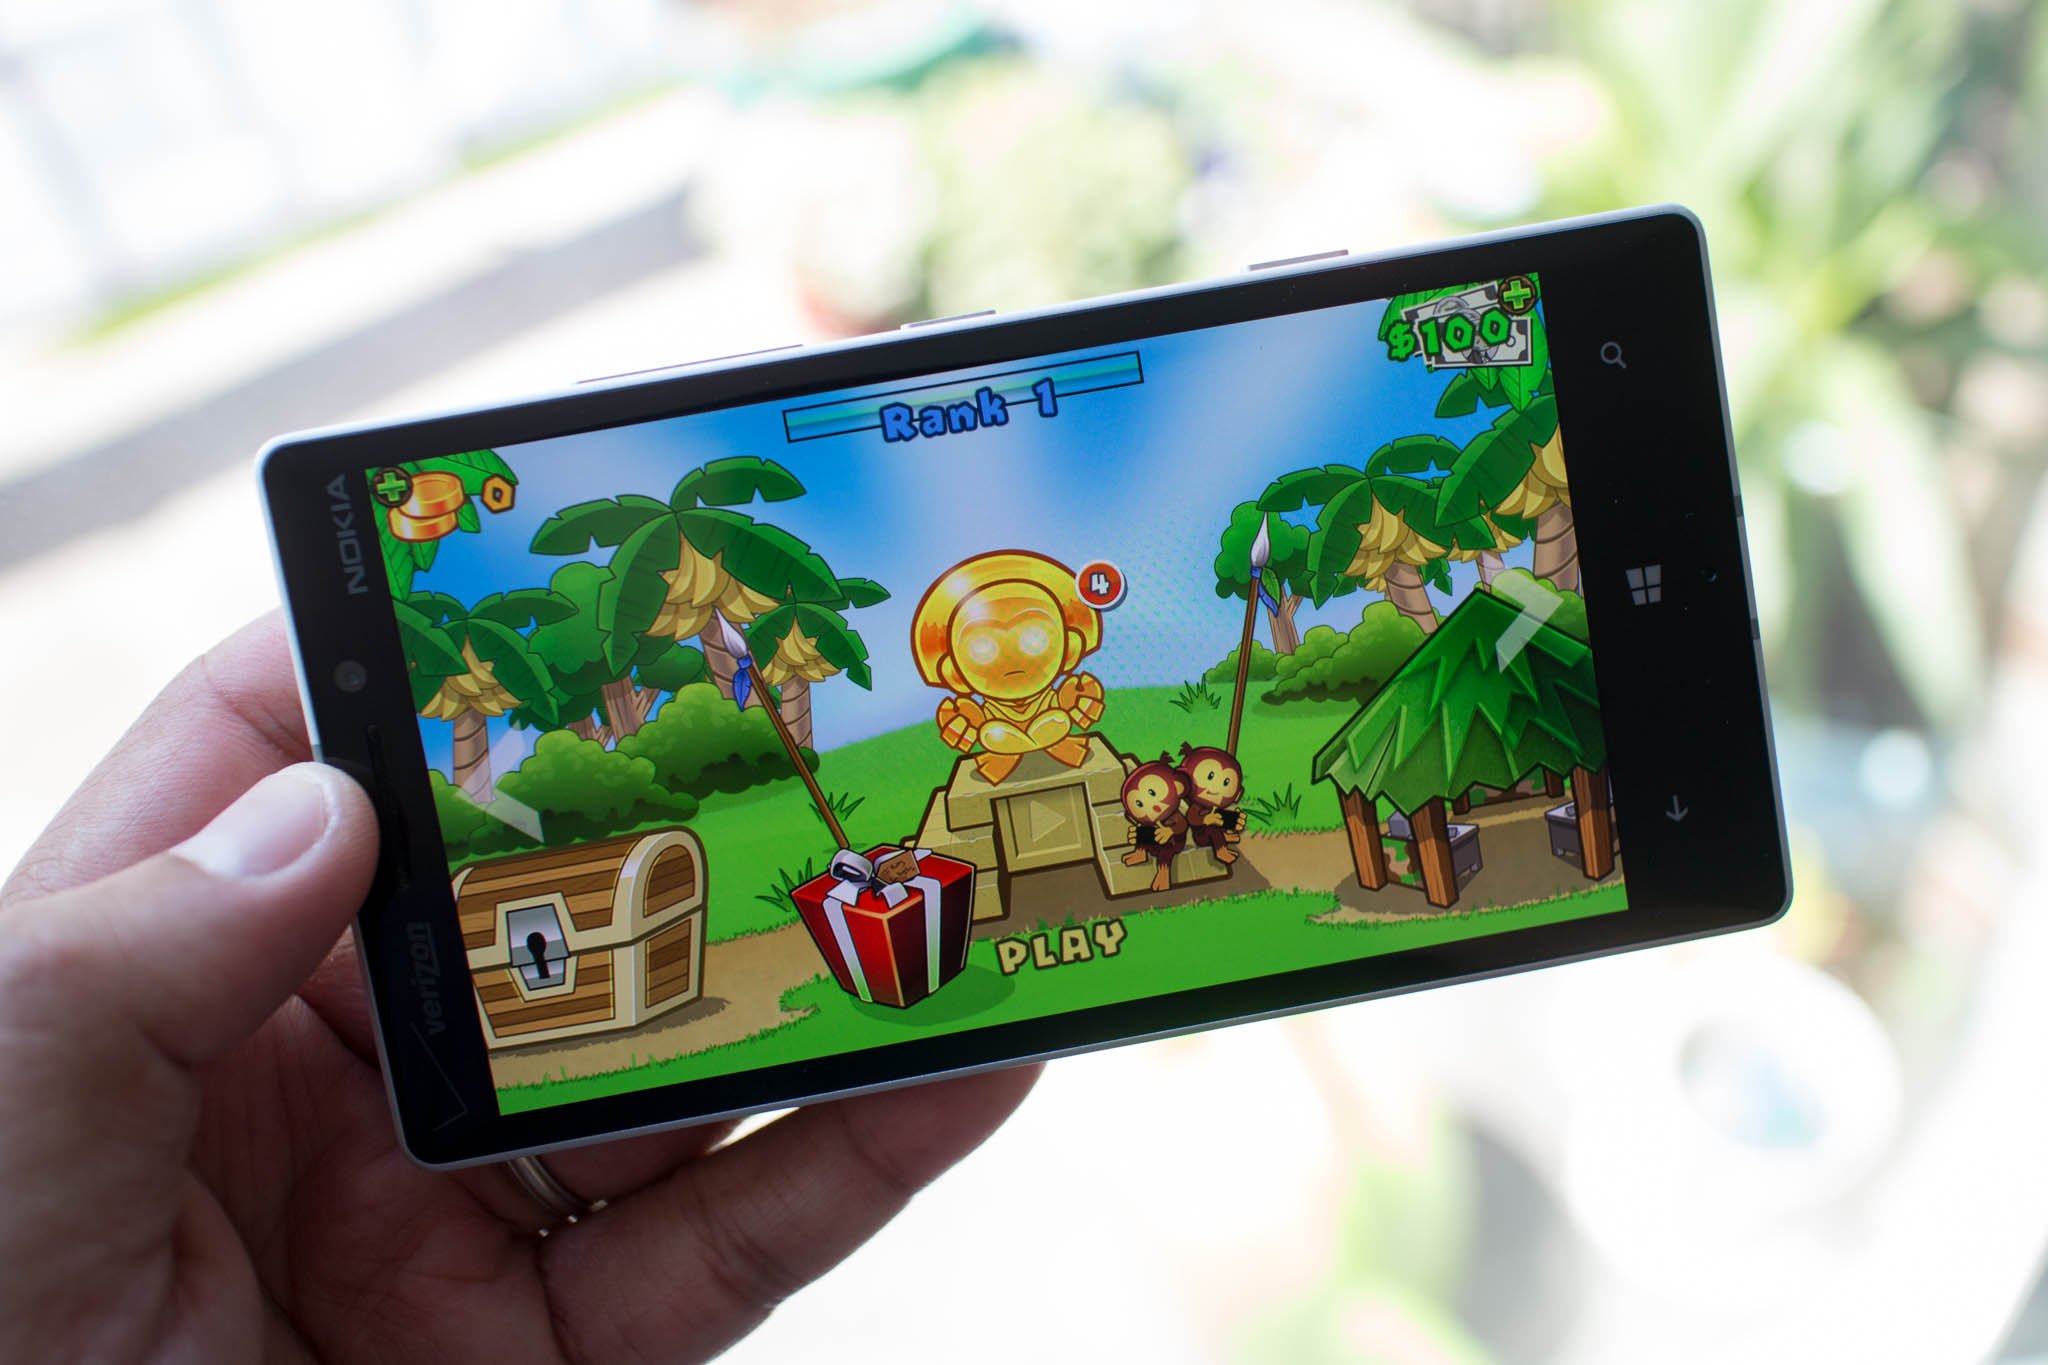 The Popular Tower Defense Game Bloons Td 5 Is A Universal Game For